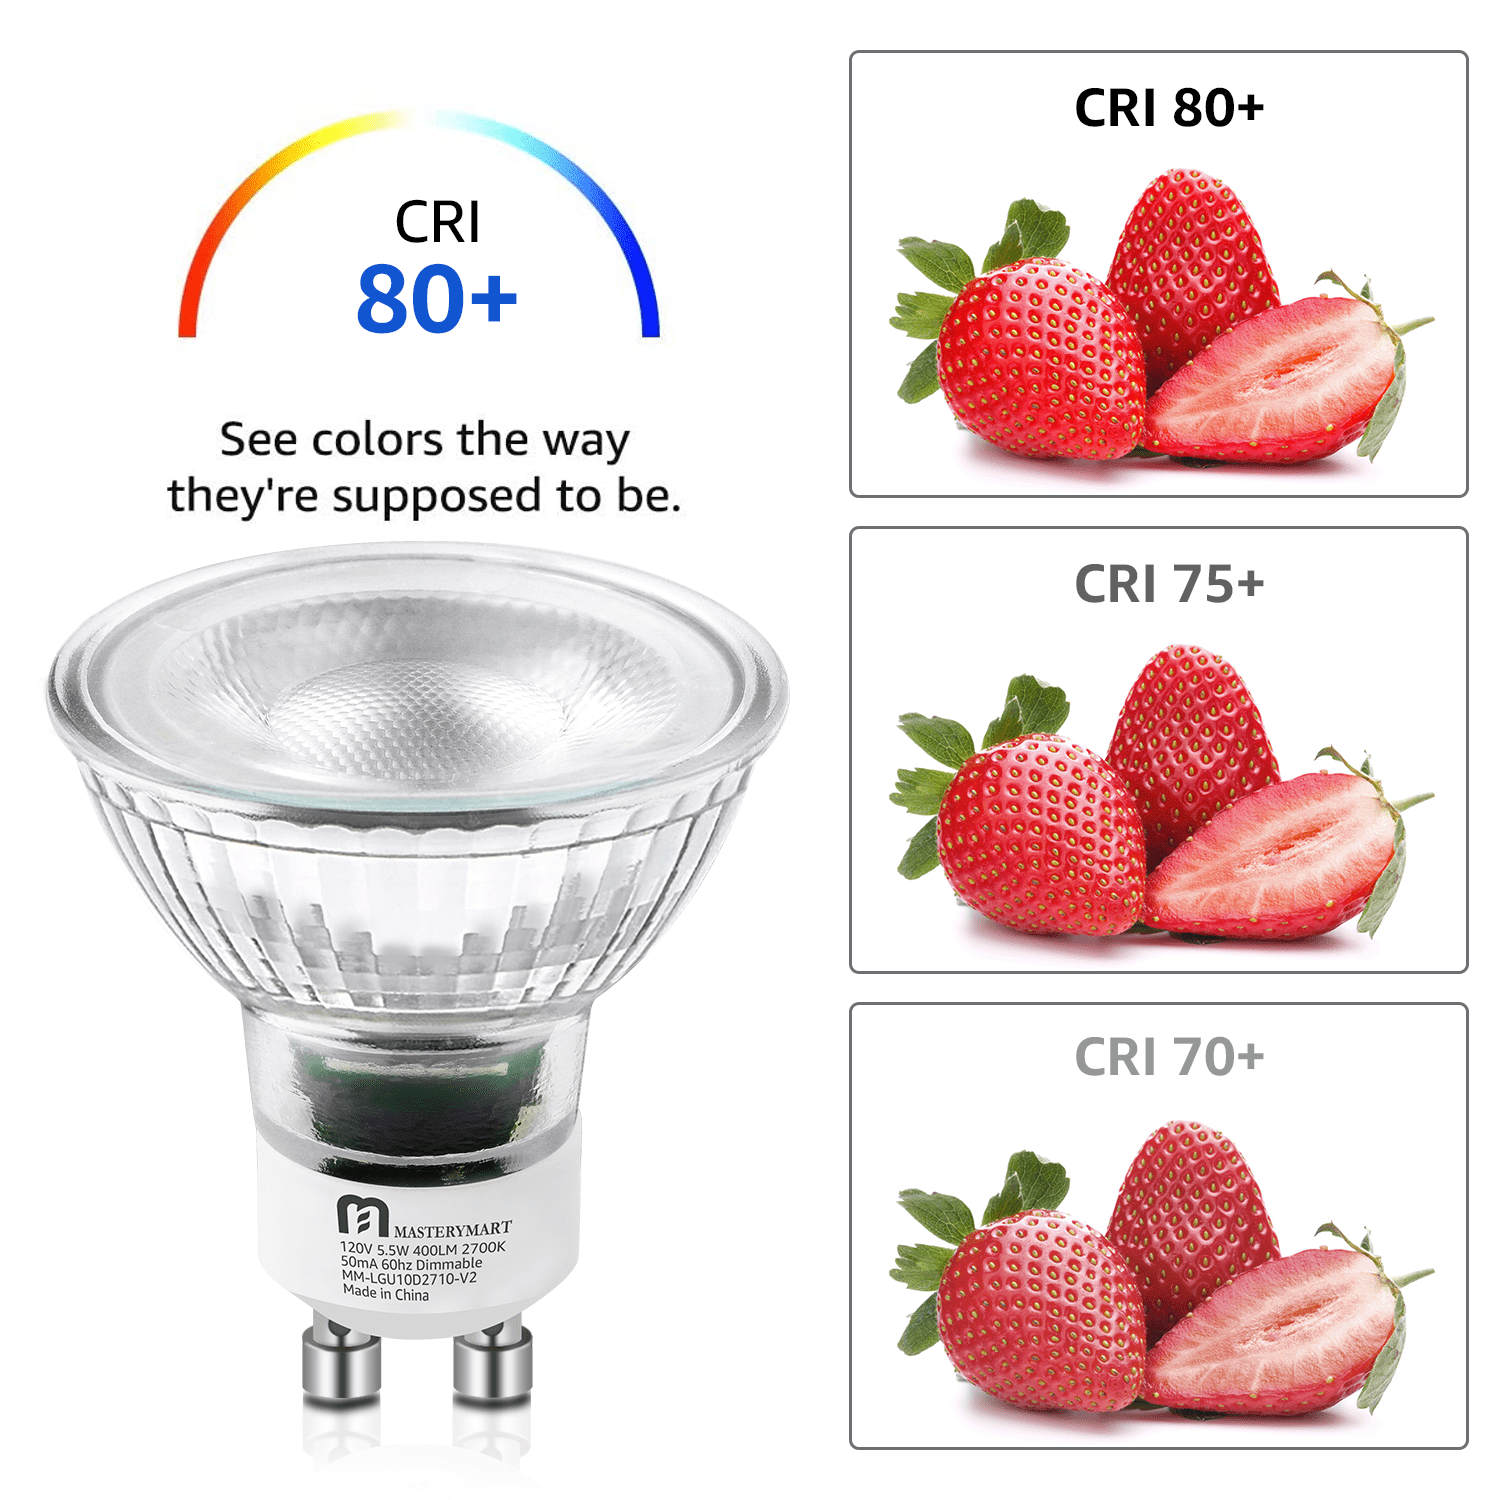 Mastery Mart Dimmable GU10 LED Light Bulbs, 50W Equivalent, 400LM, 2700K  Soft White, Lasts 25,000hrs, 6-pack | Wandleuchten